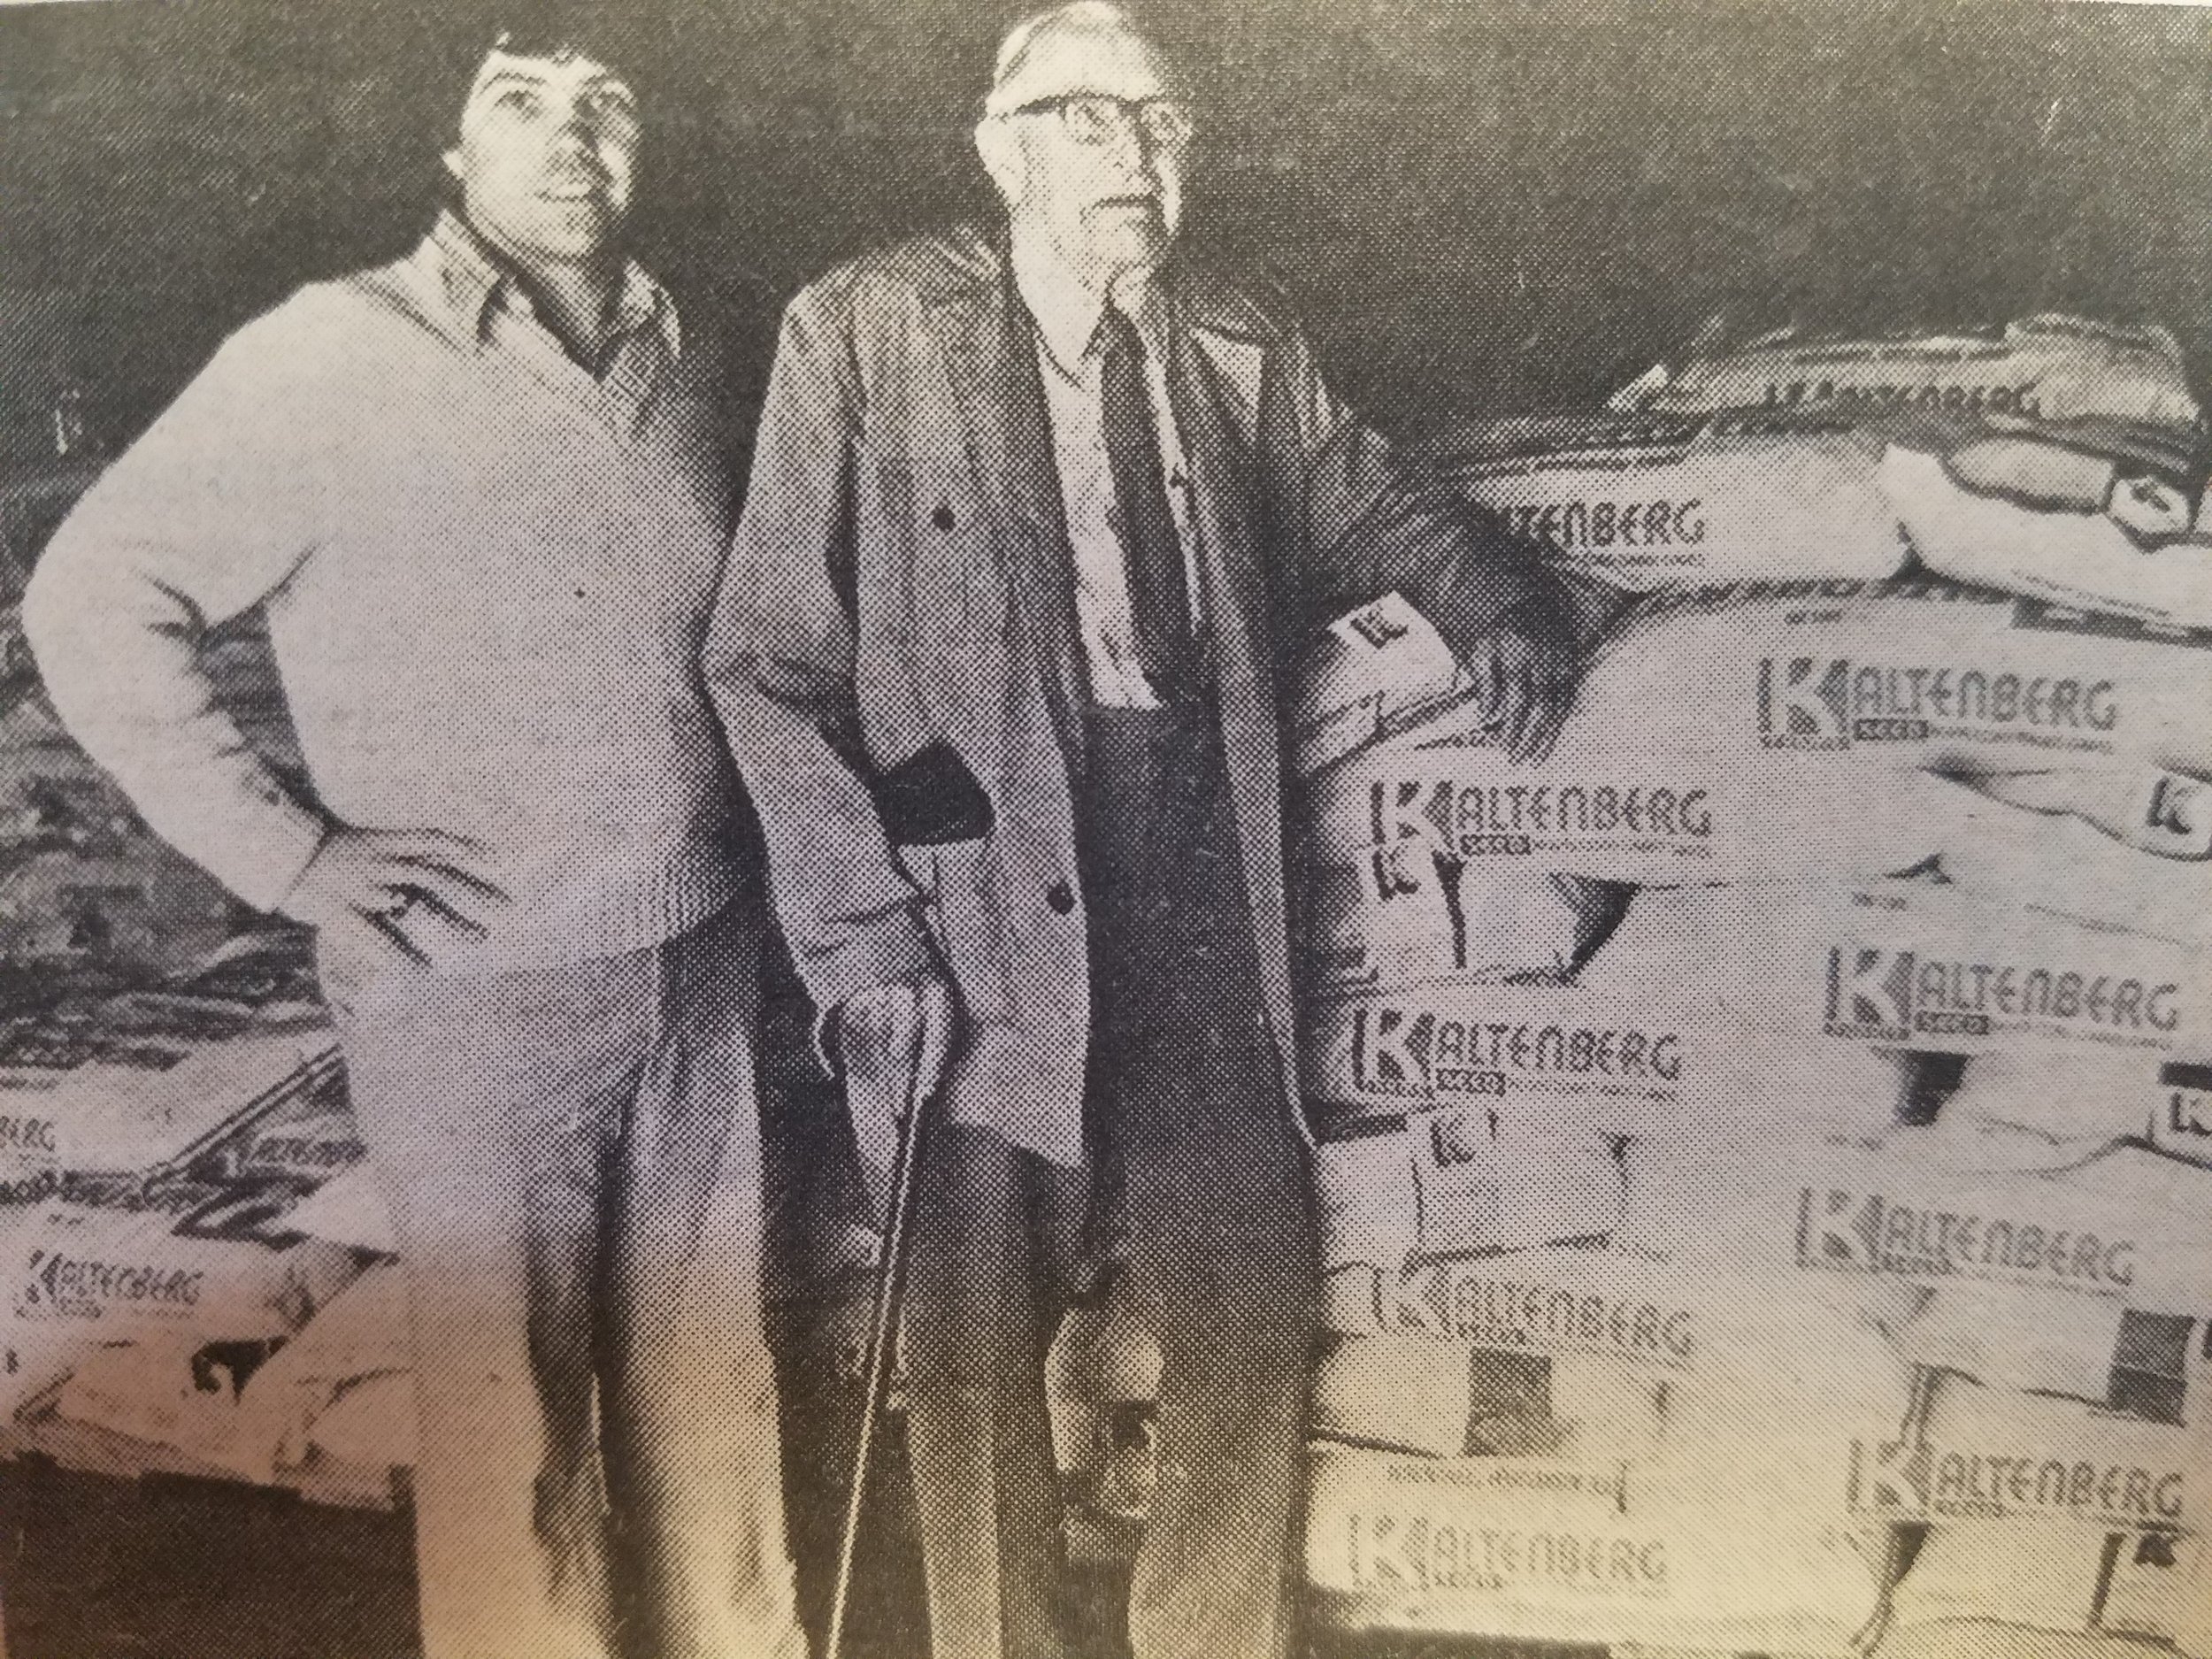 Owner Jack Kaltenberg and his grandfather and first generation in the seed world Anton Kaltenberg